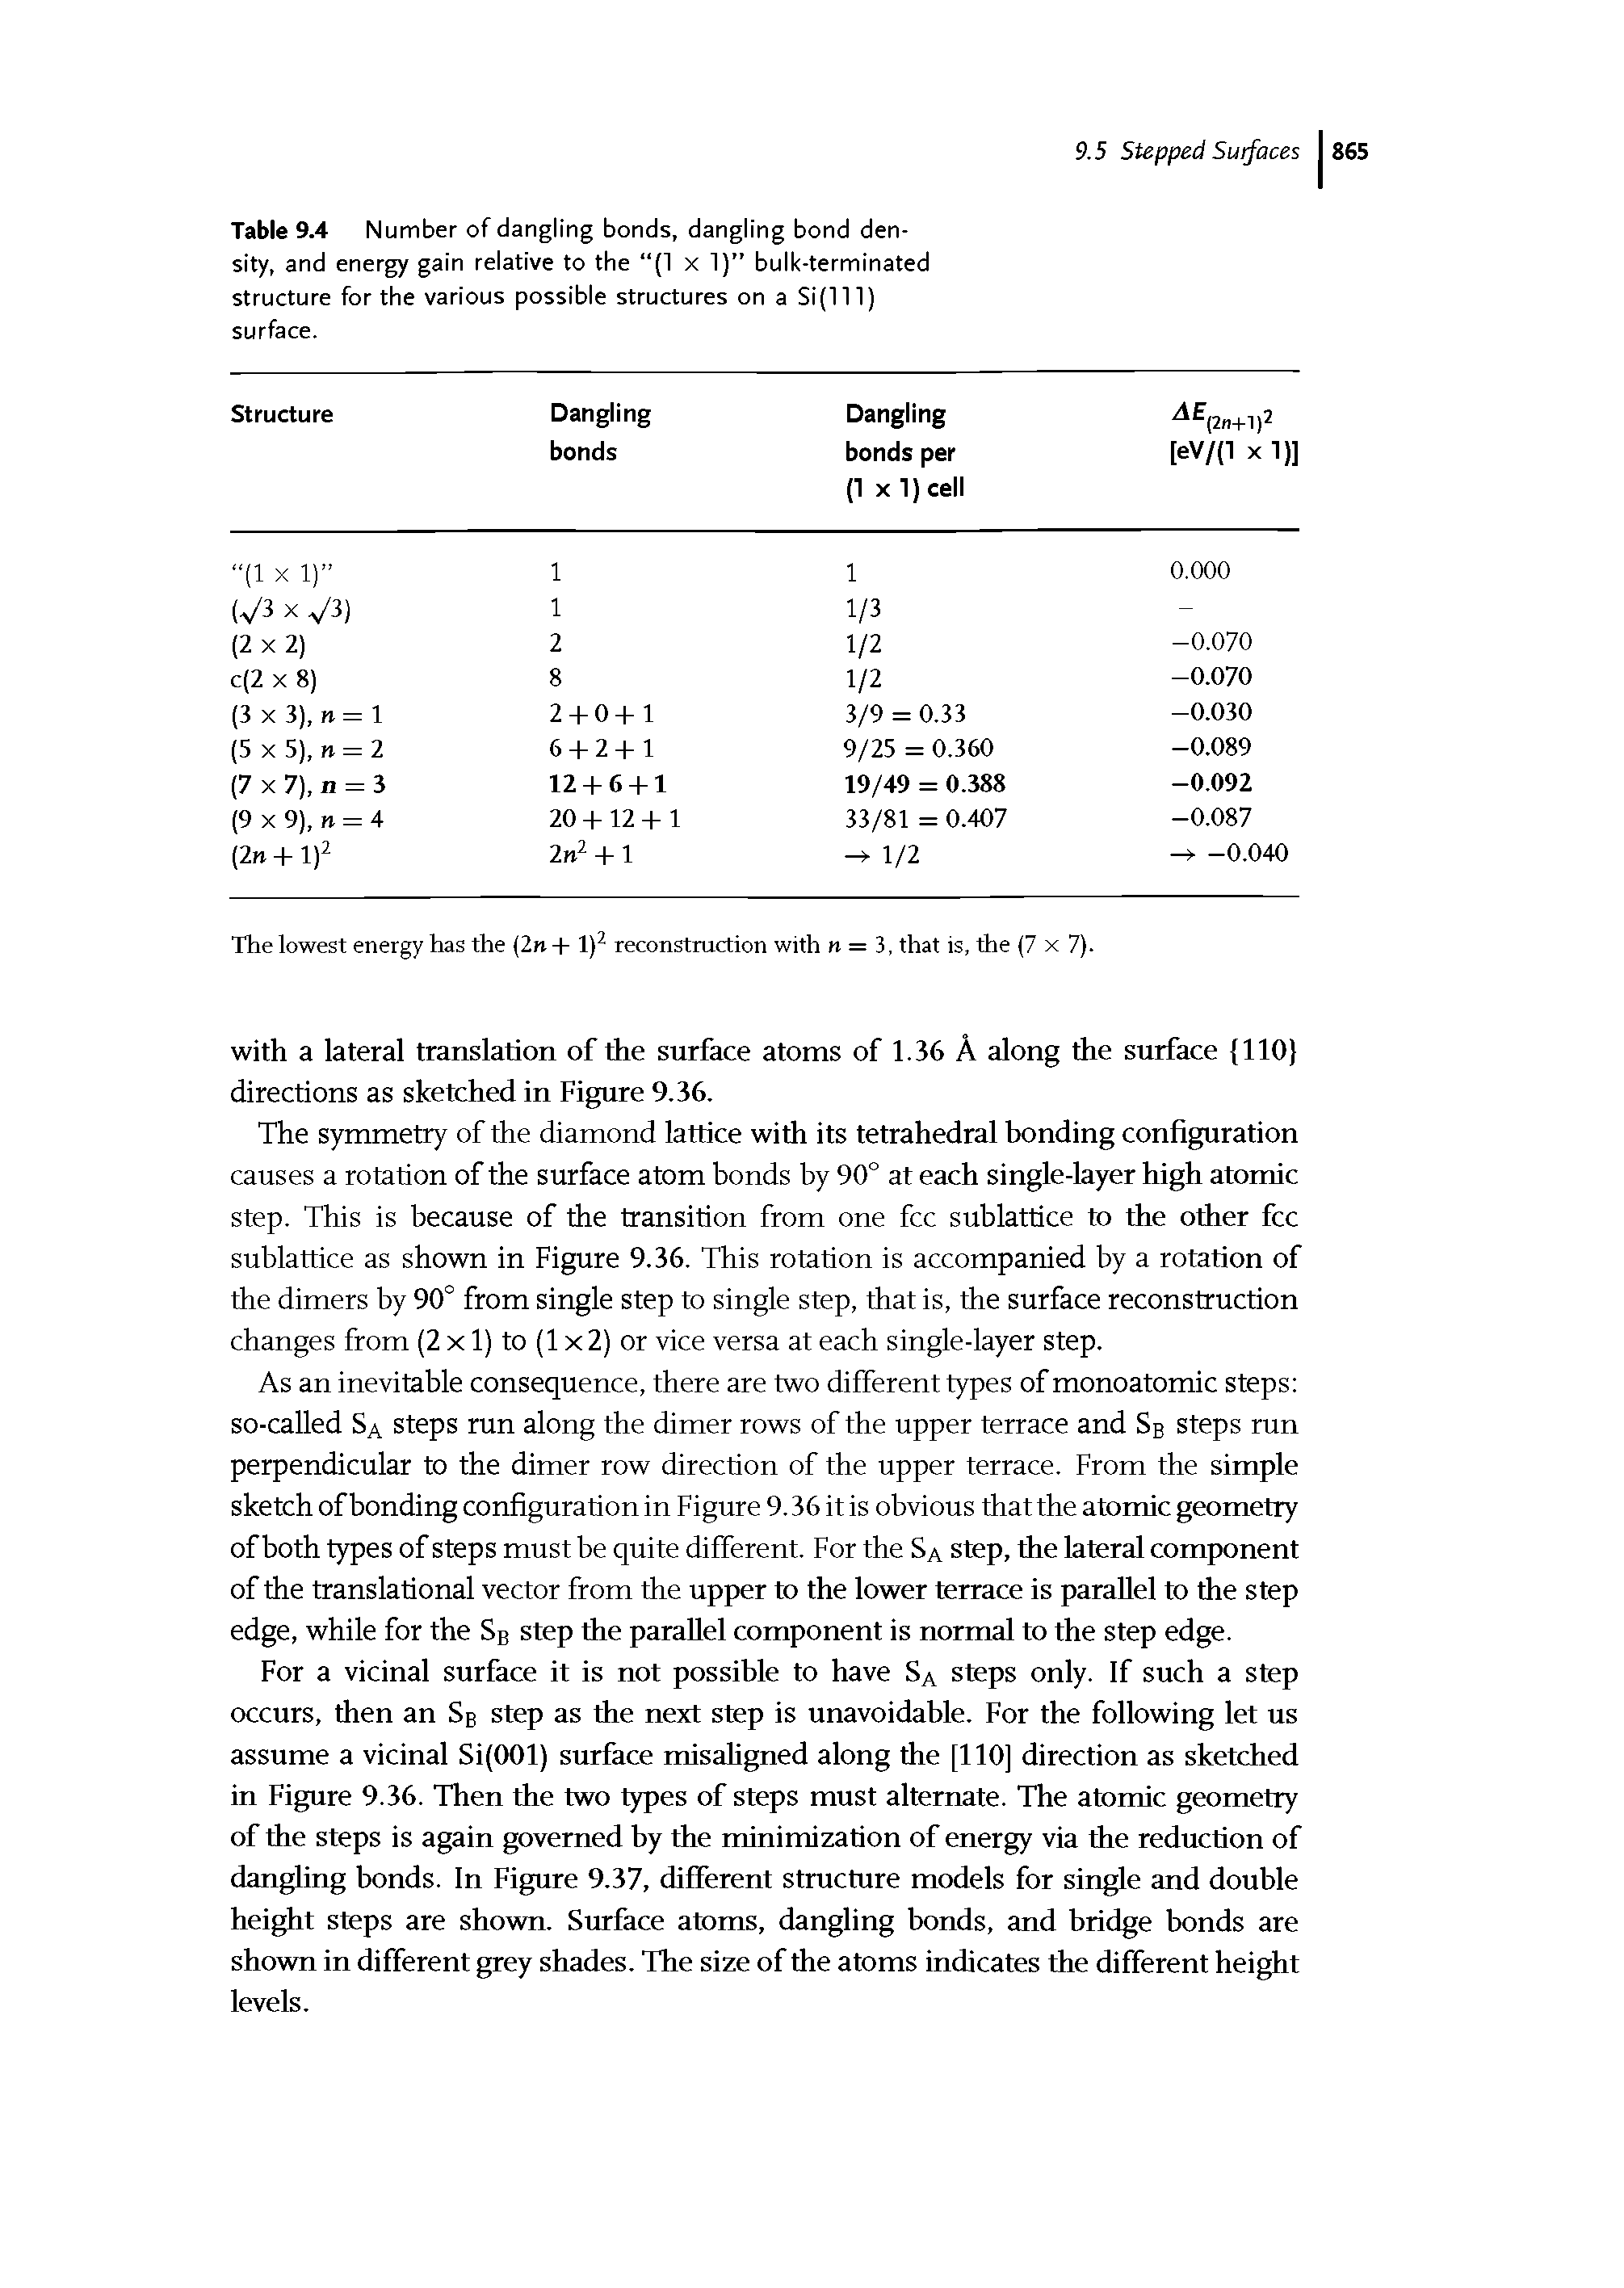 Table 9.4 Number of dangling bonds, dangling bond density, and energy gain relative to the (1 x 1) bulk-terminated structure for the various possible structures on a 51(111) surface.